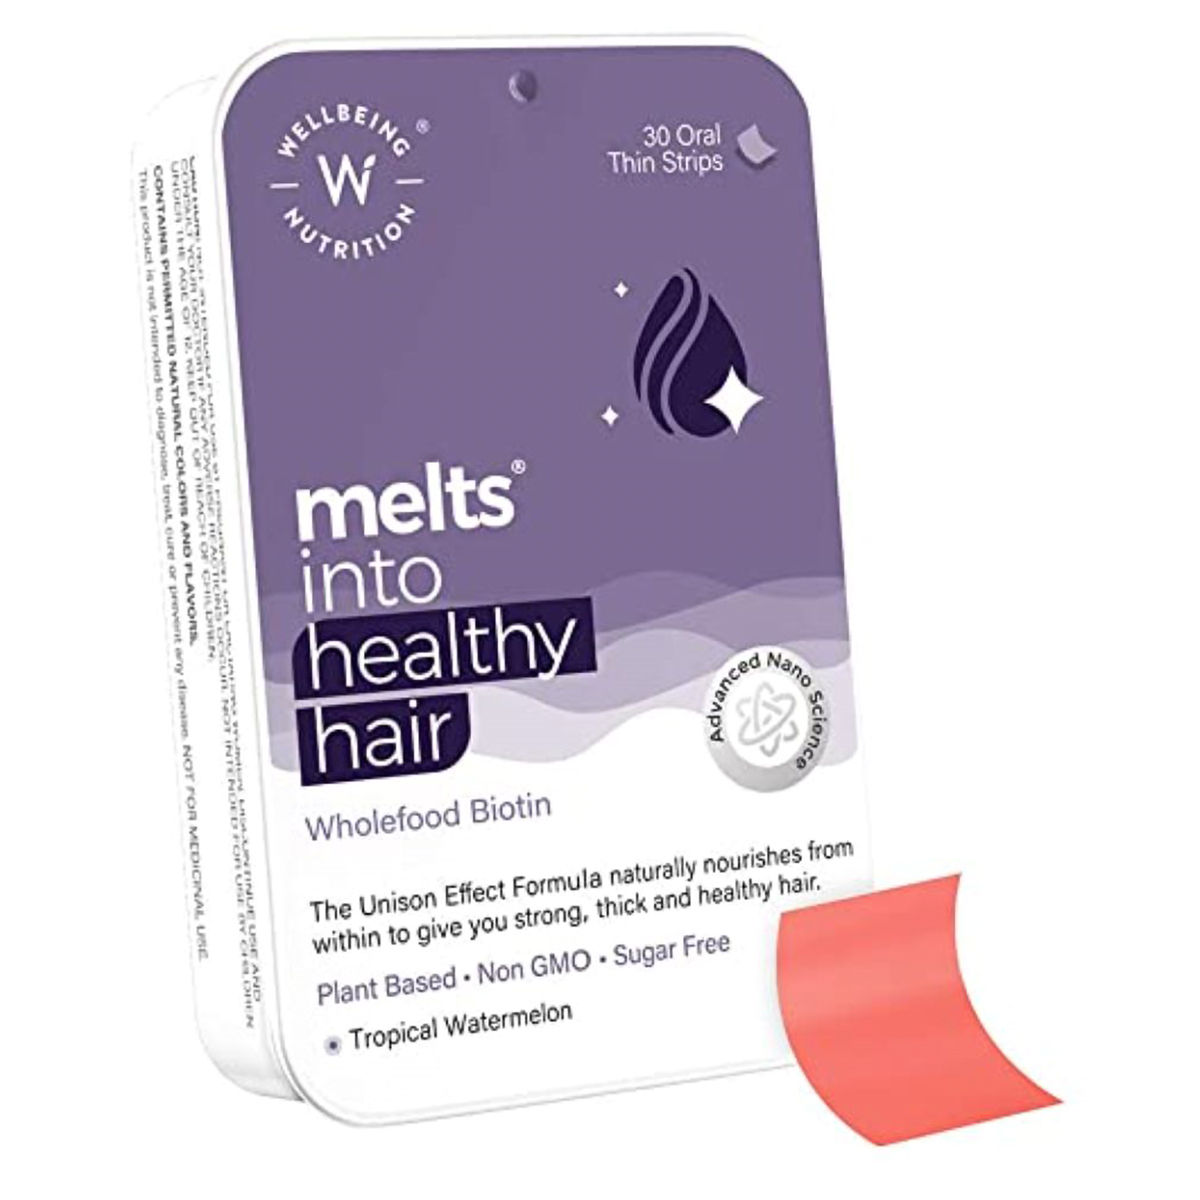 Buy Wellbeing Nutrition Melts Into Healthy Hair Wholefood Biotin Sugar Free, 30 Strips Online